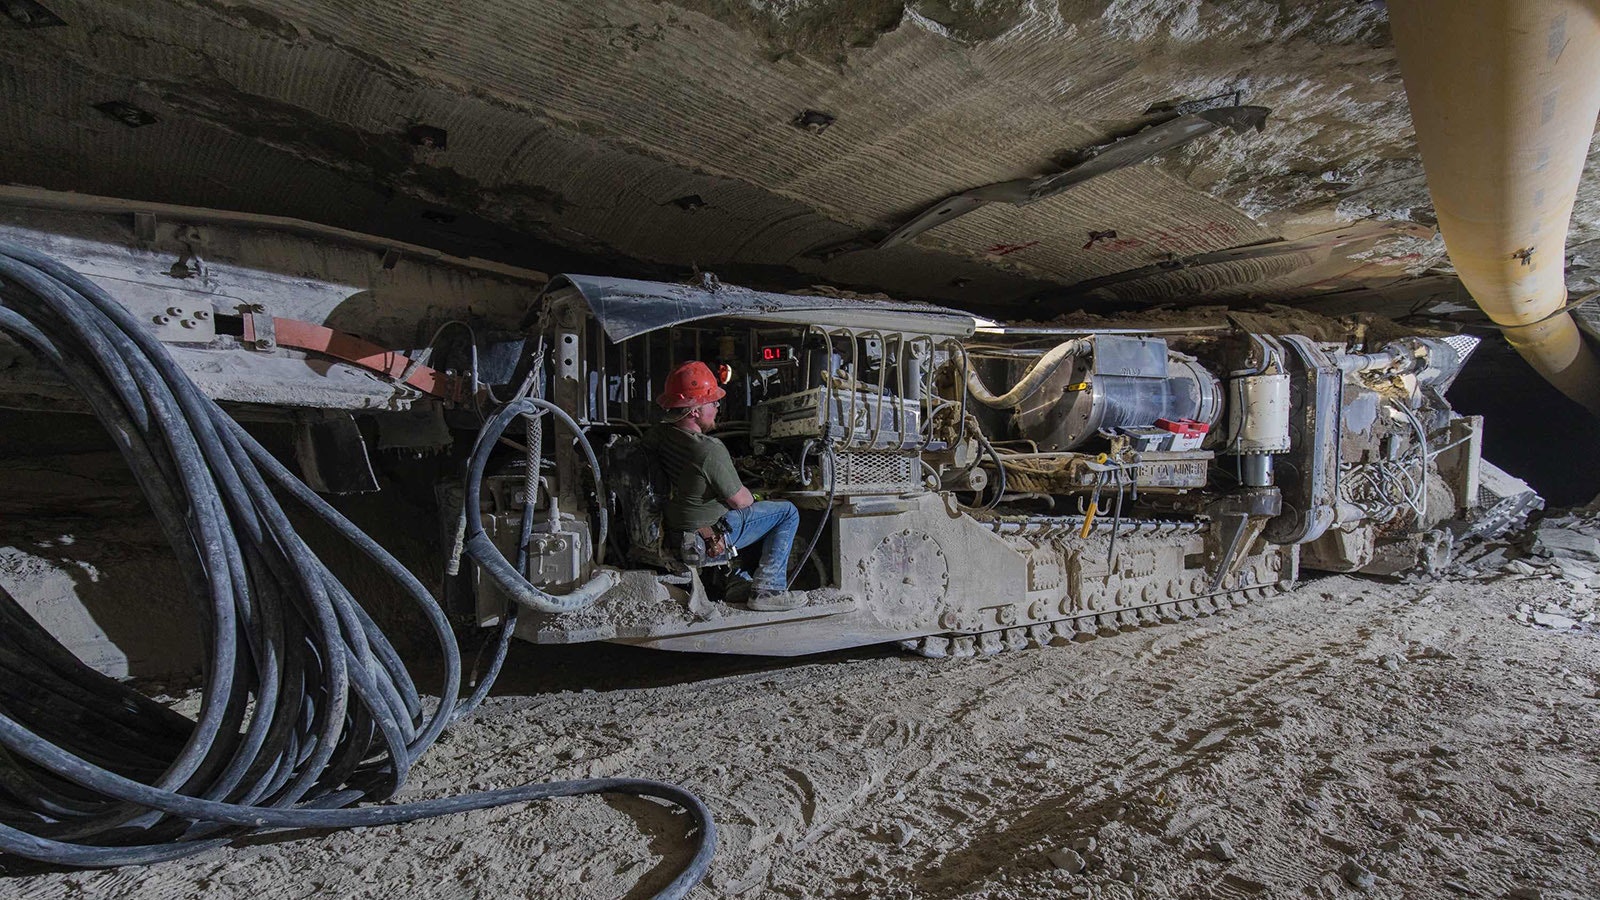 Genesis Alkali workers underground in the company's Wyoming trona mine operating continuous mining equipment and other machinery.